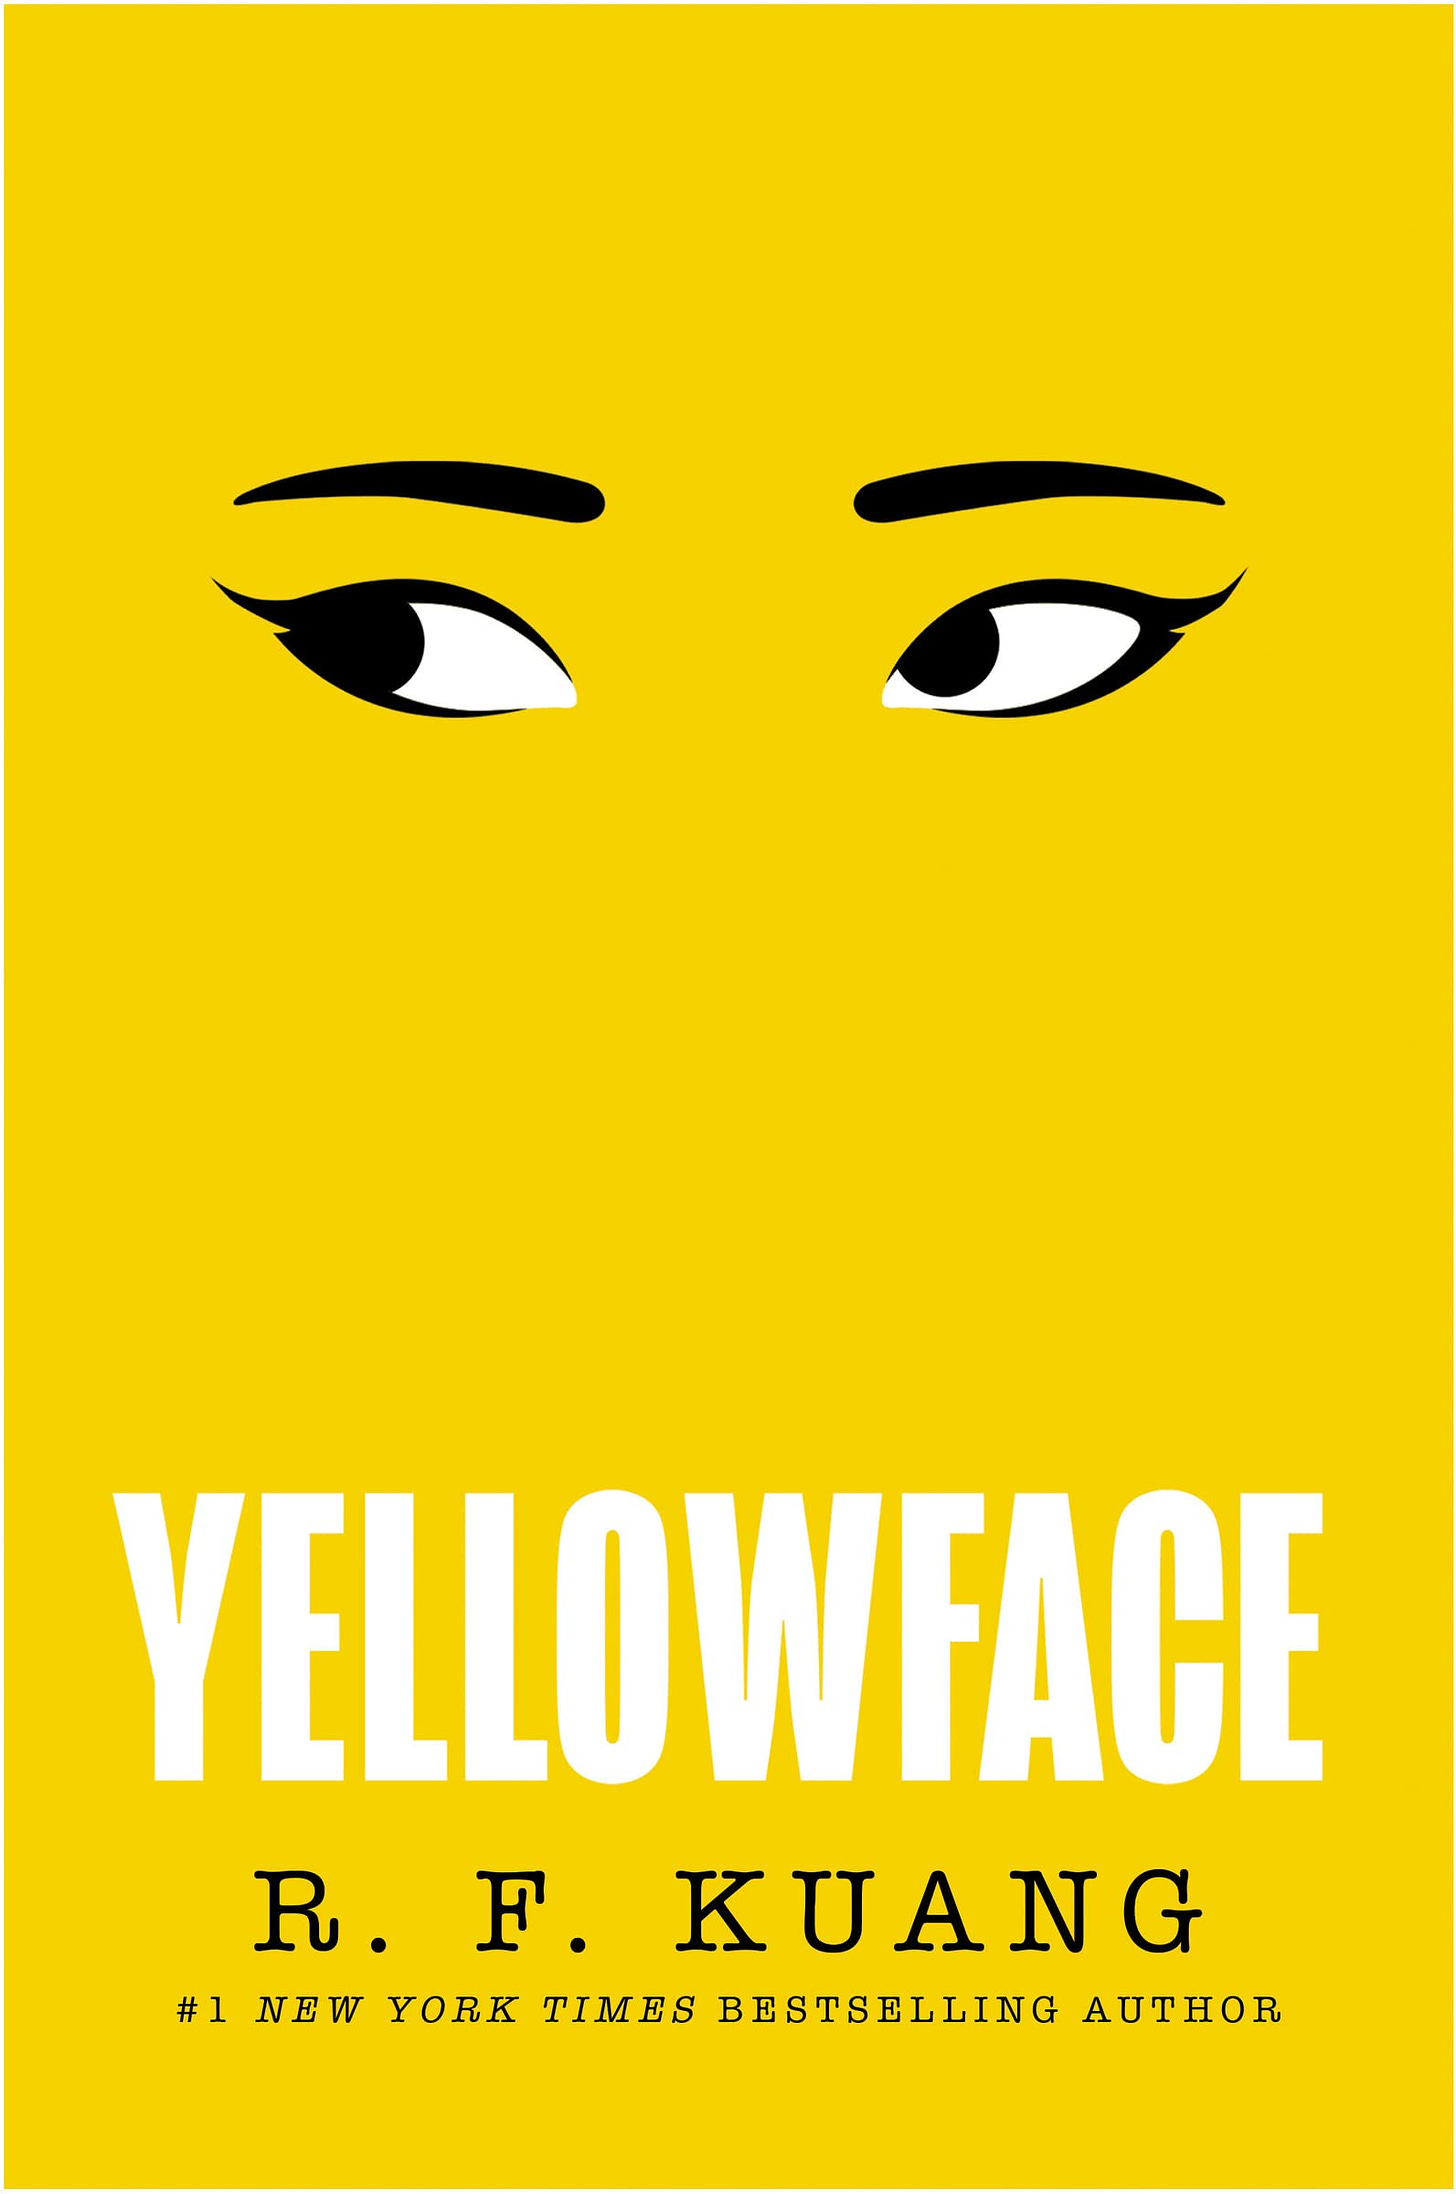 Yellowface by R.F. Kuang | Goodreads